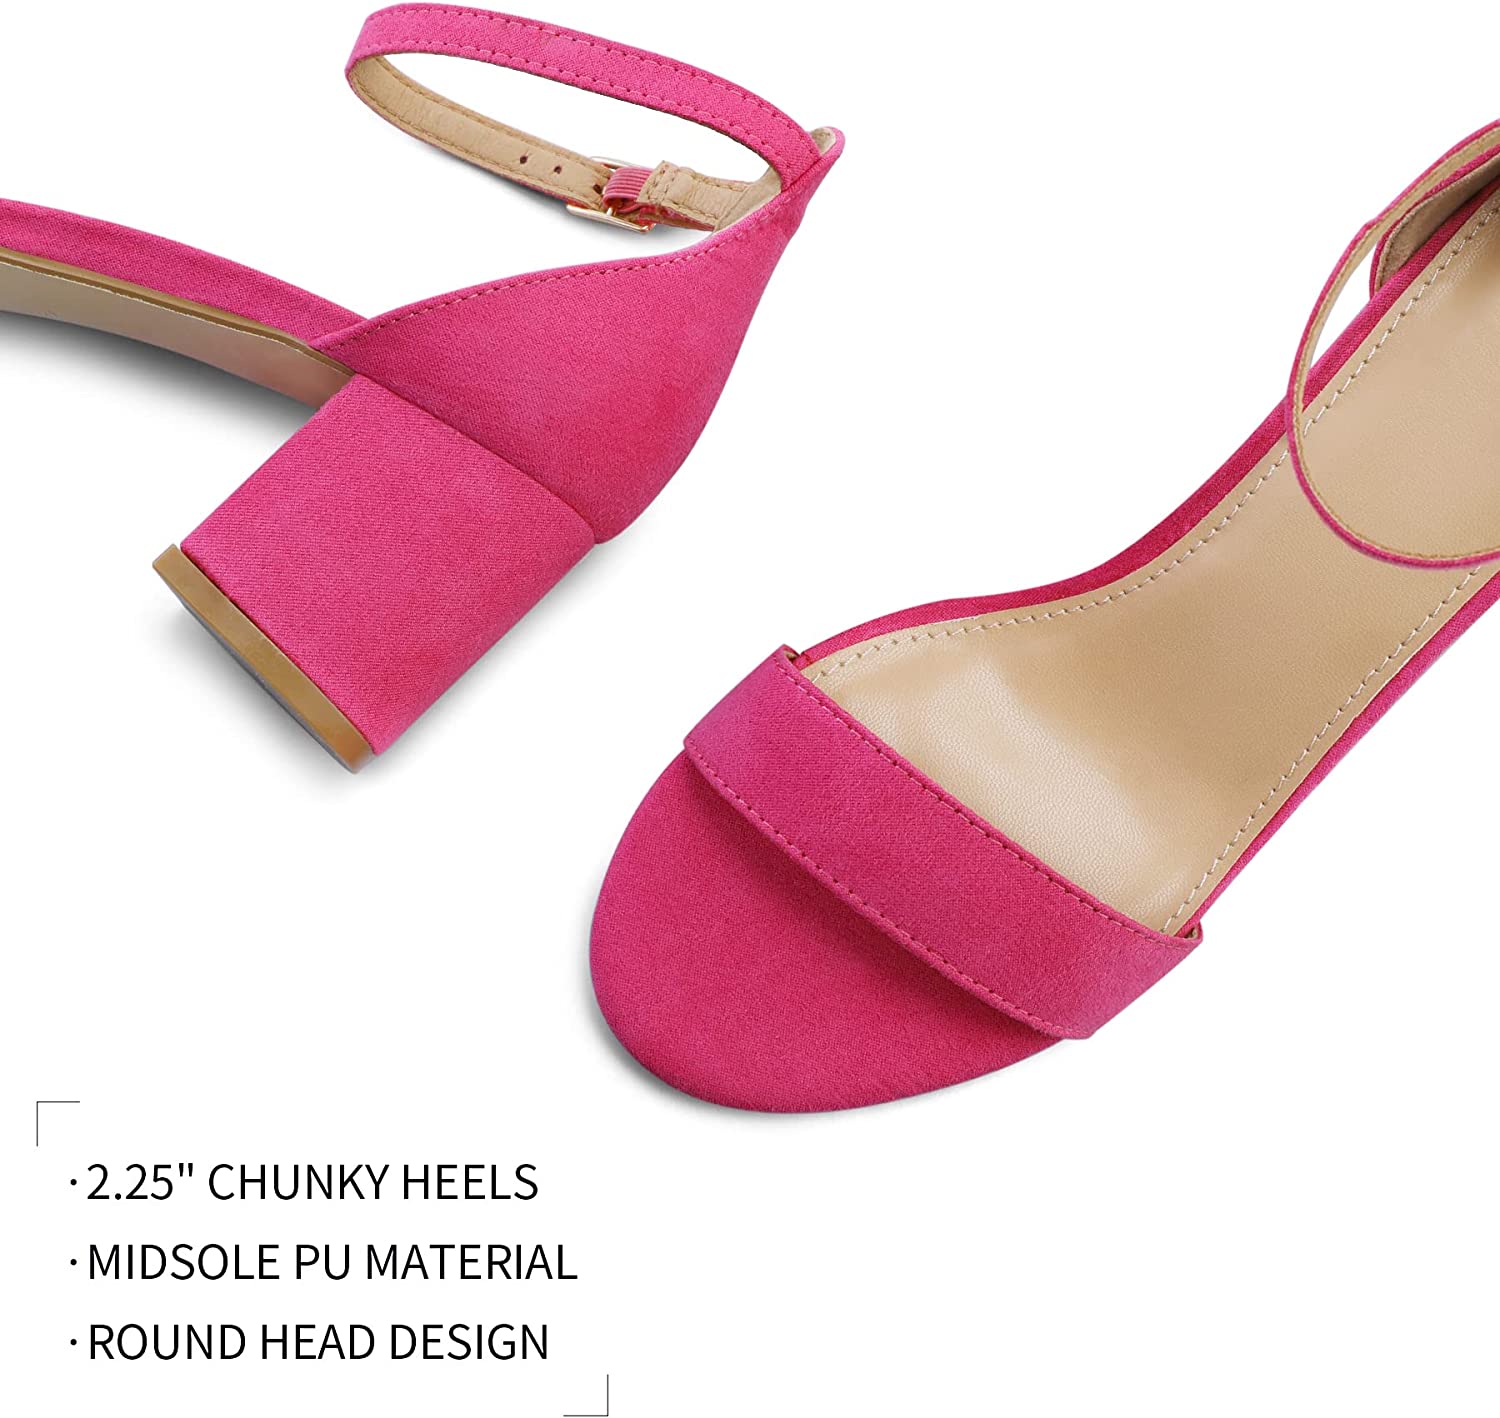 Bright Ankle Strap Round Toe Low Heel Sandals